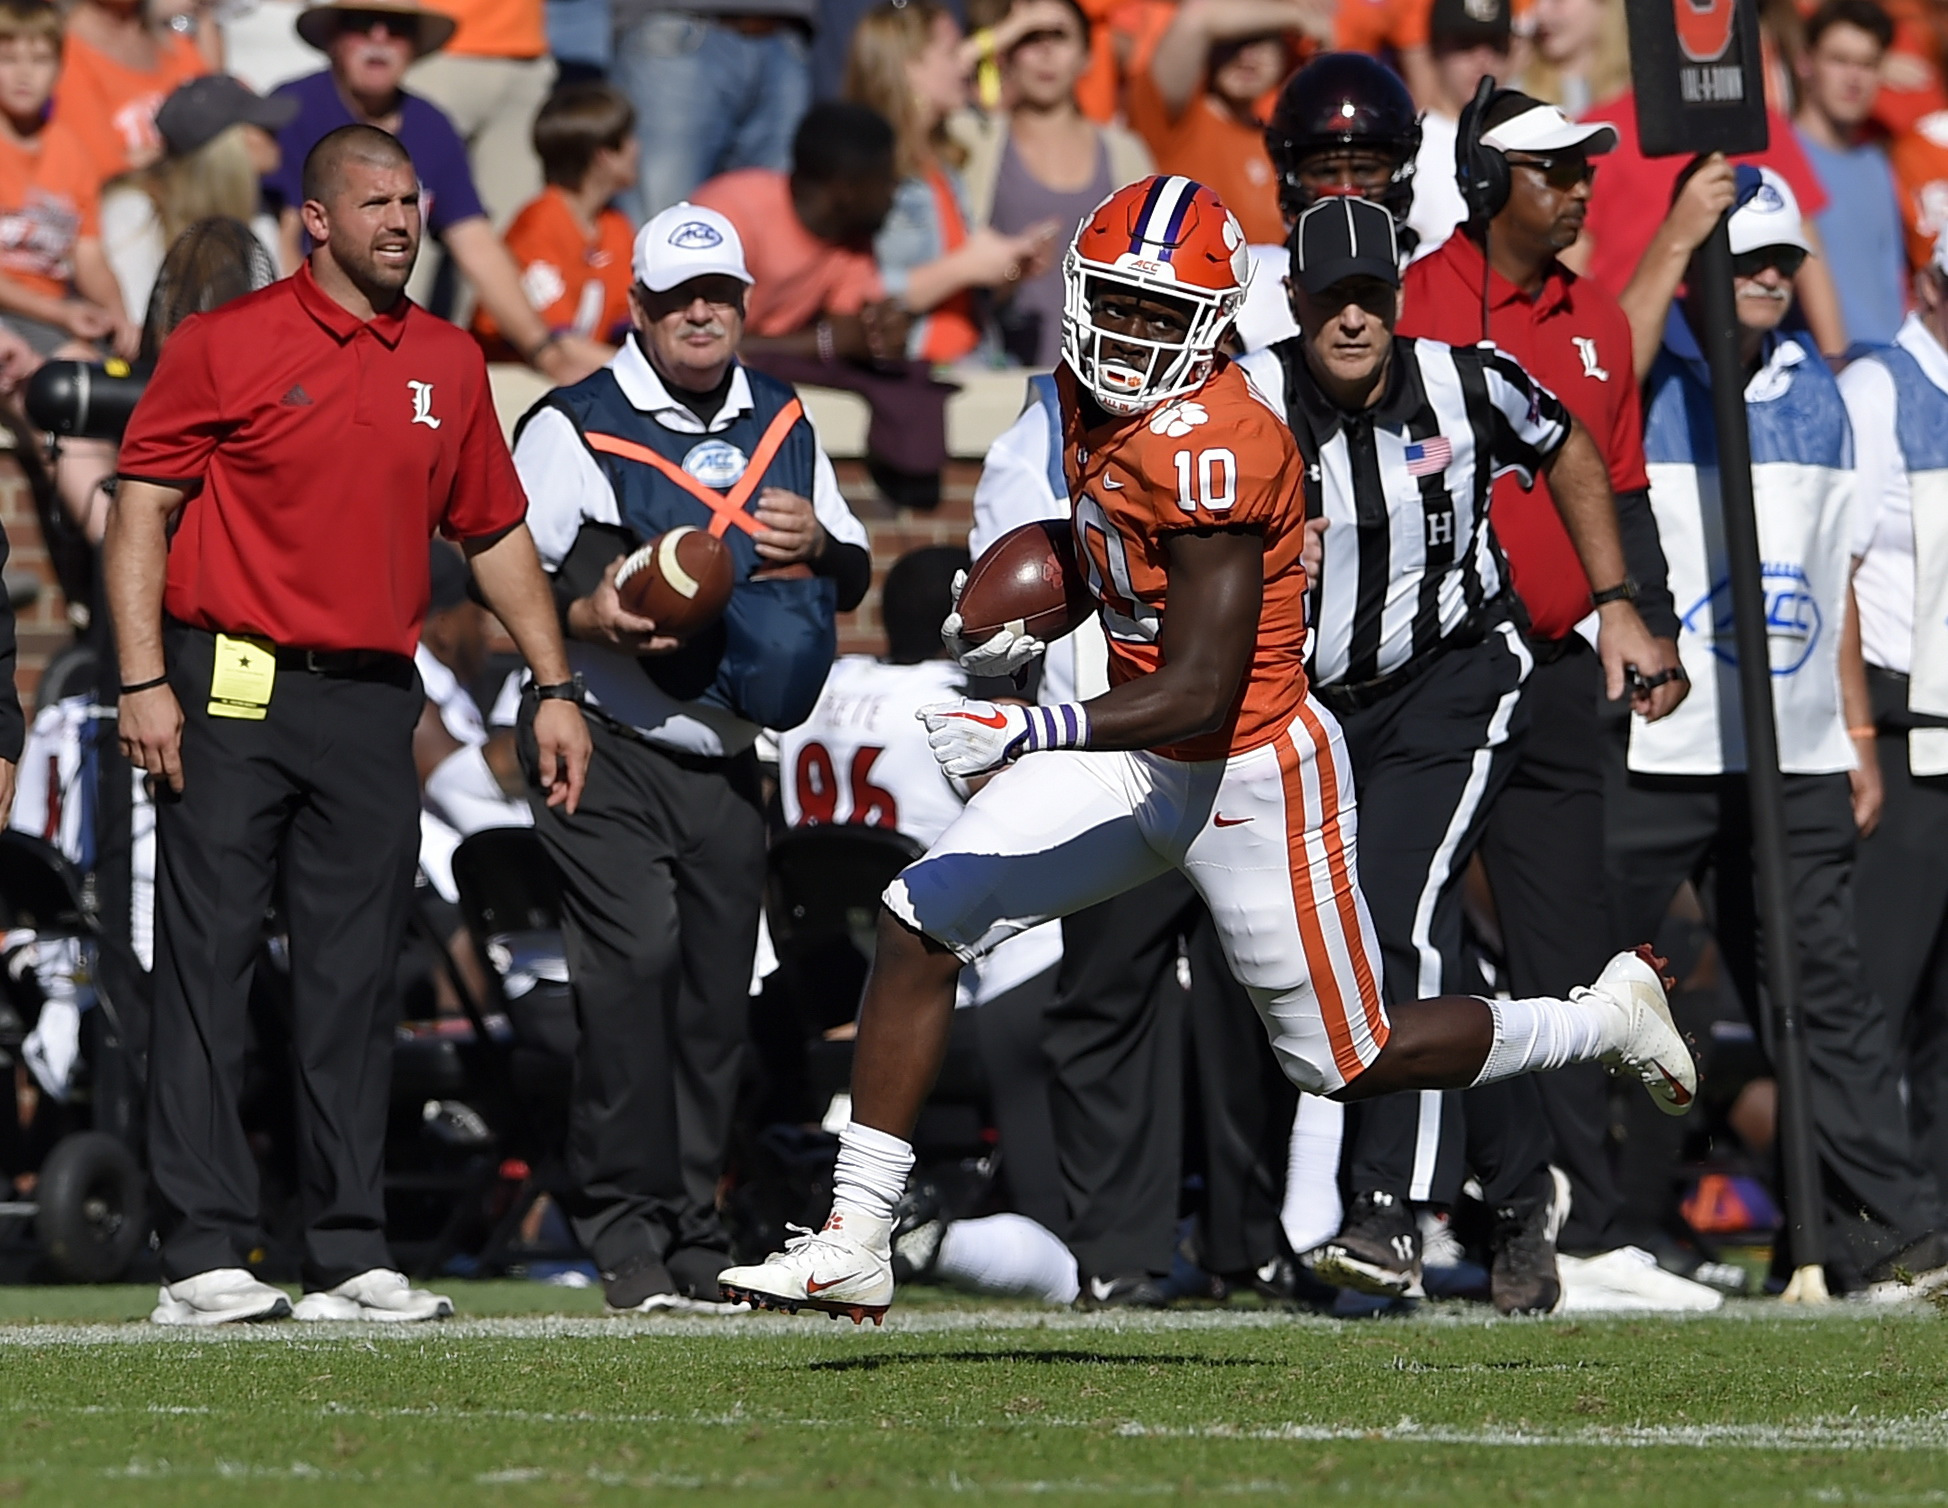 College football: No. 2 Clemson routs Louisville 77-16